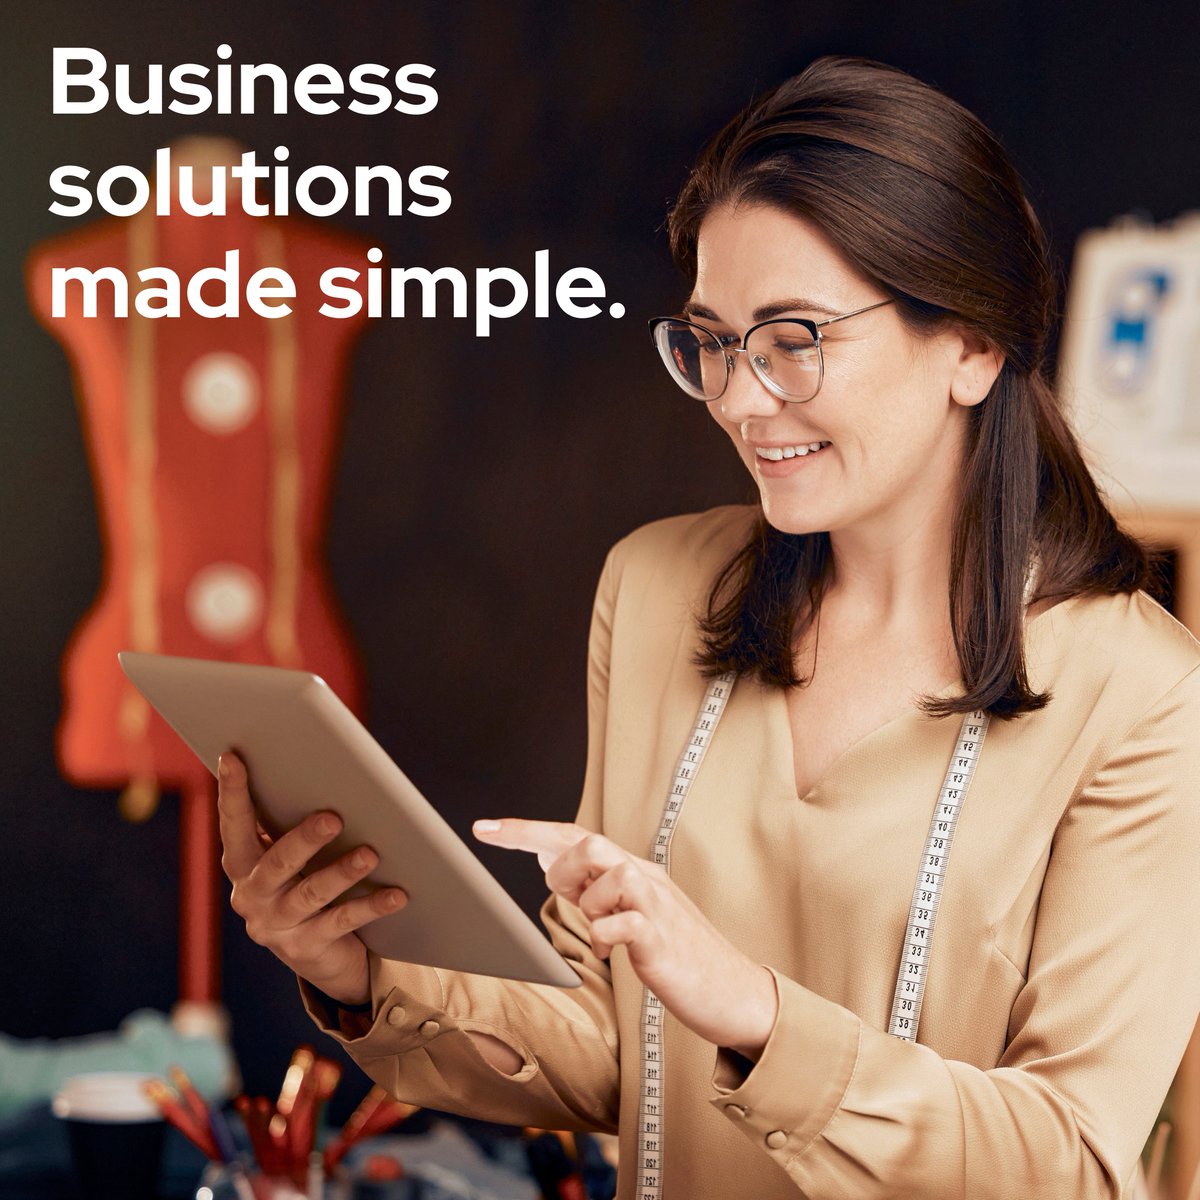 Spend more time growing your business while we handle the logistics. Aramex's SME program supports and guides your business. Simplified solutions for SMEs because success shouldn't be complicated.

Learn more at: sme.aramex.com

#Aramex #DeliveryUnlimited #SMESupport